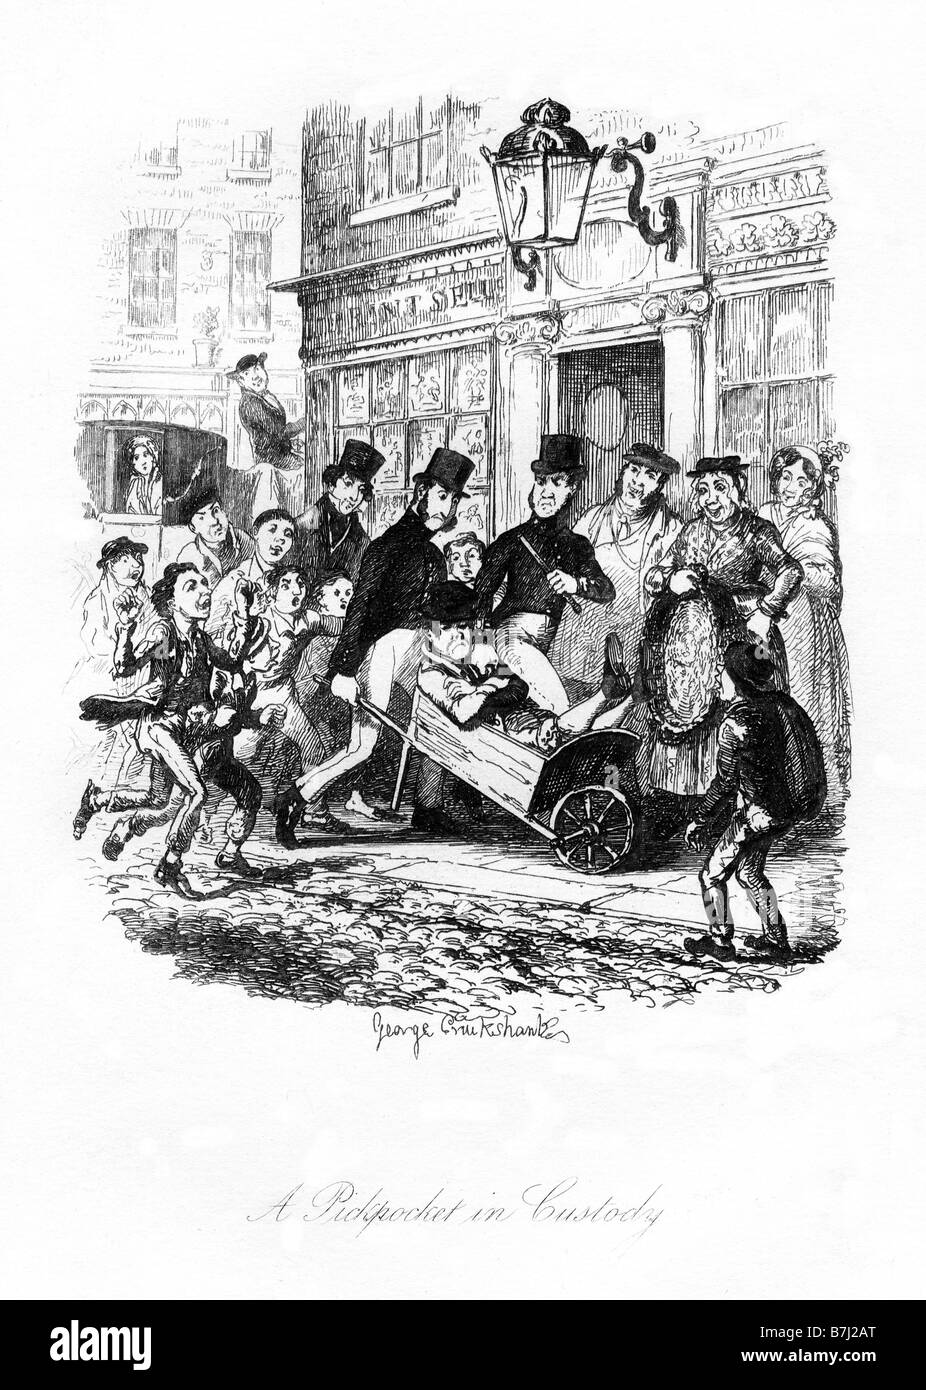 Sketches by Boz A Pickpocket In Custody illustration by George Cruikshank of the new Peelers in Dickens first book Stock Photo